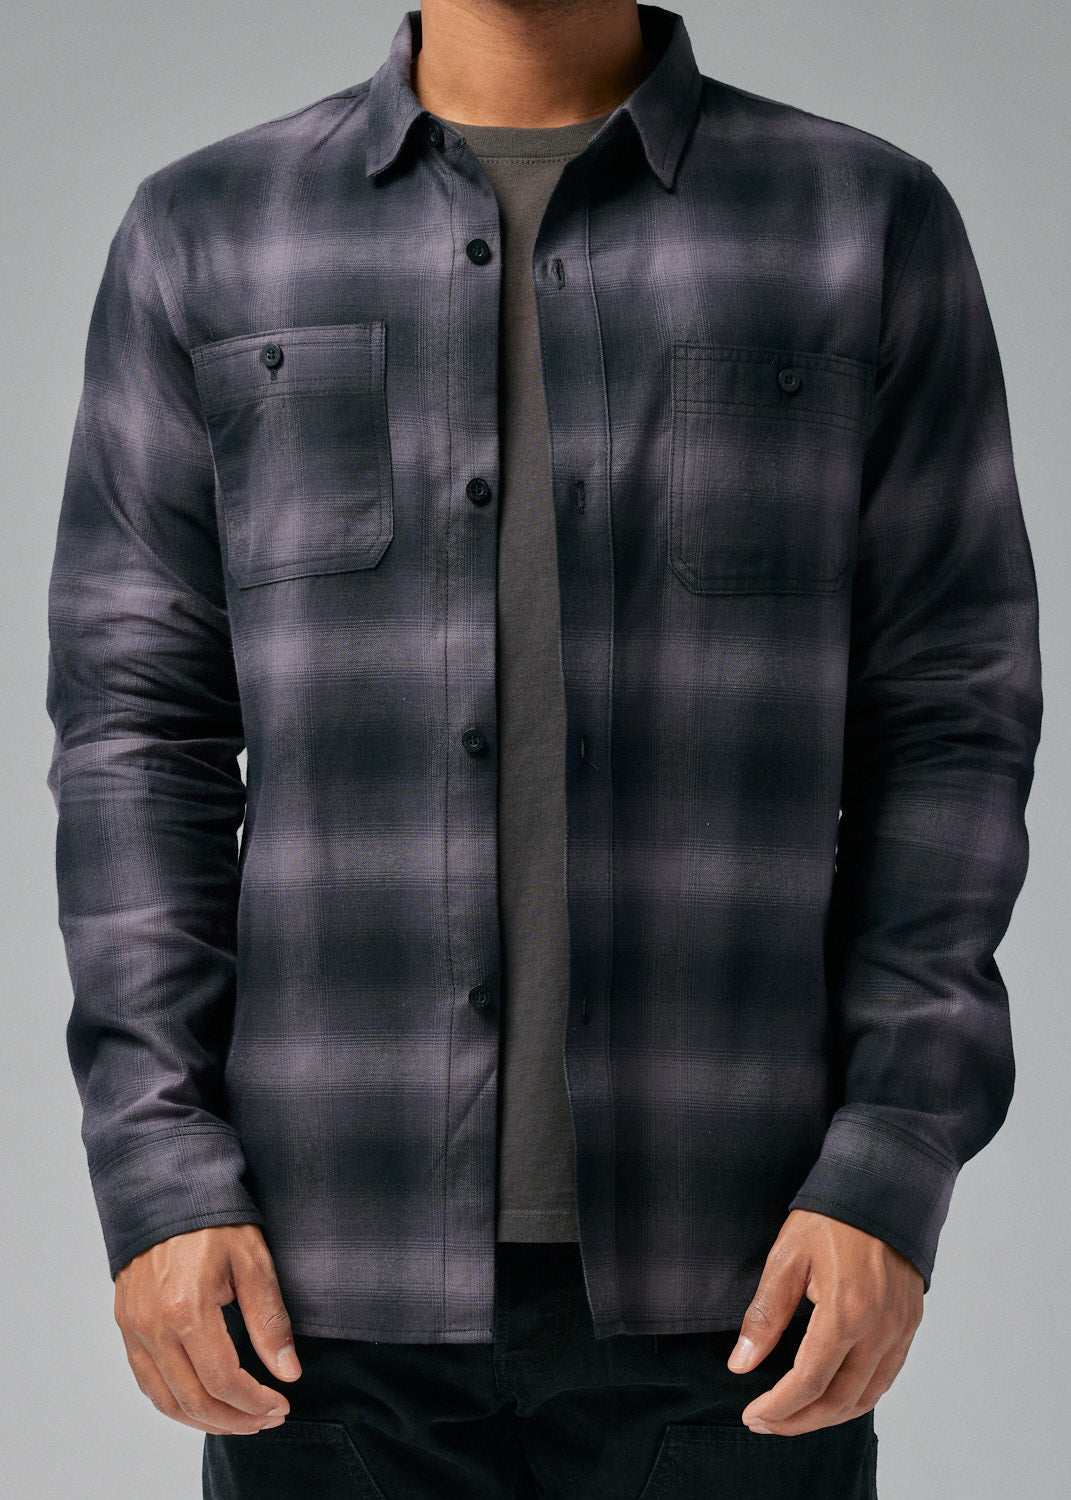 One of These Days - Grey Hometown Hero Flannel | 1032 SPACE